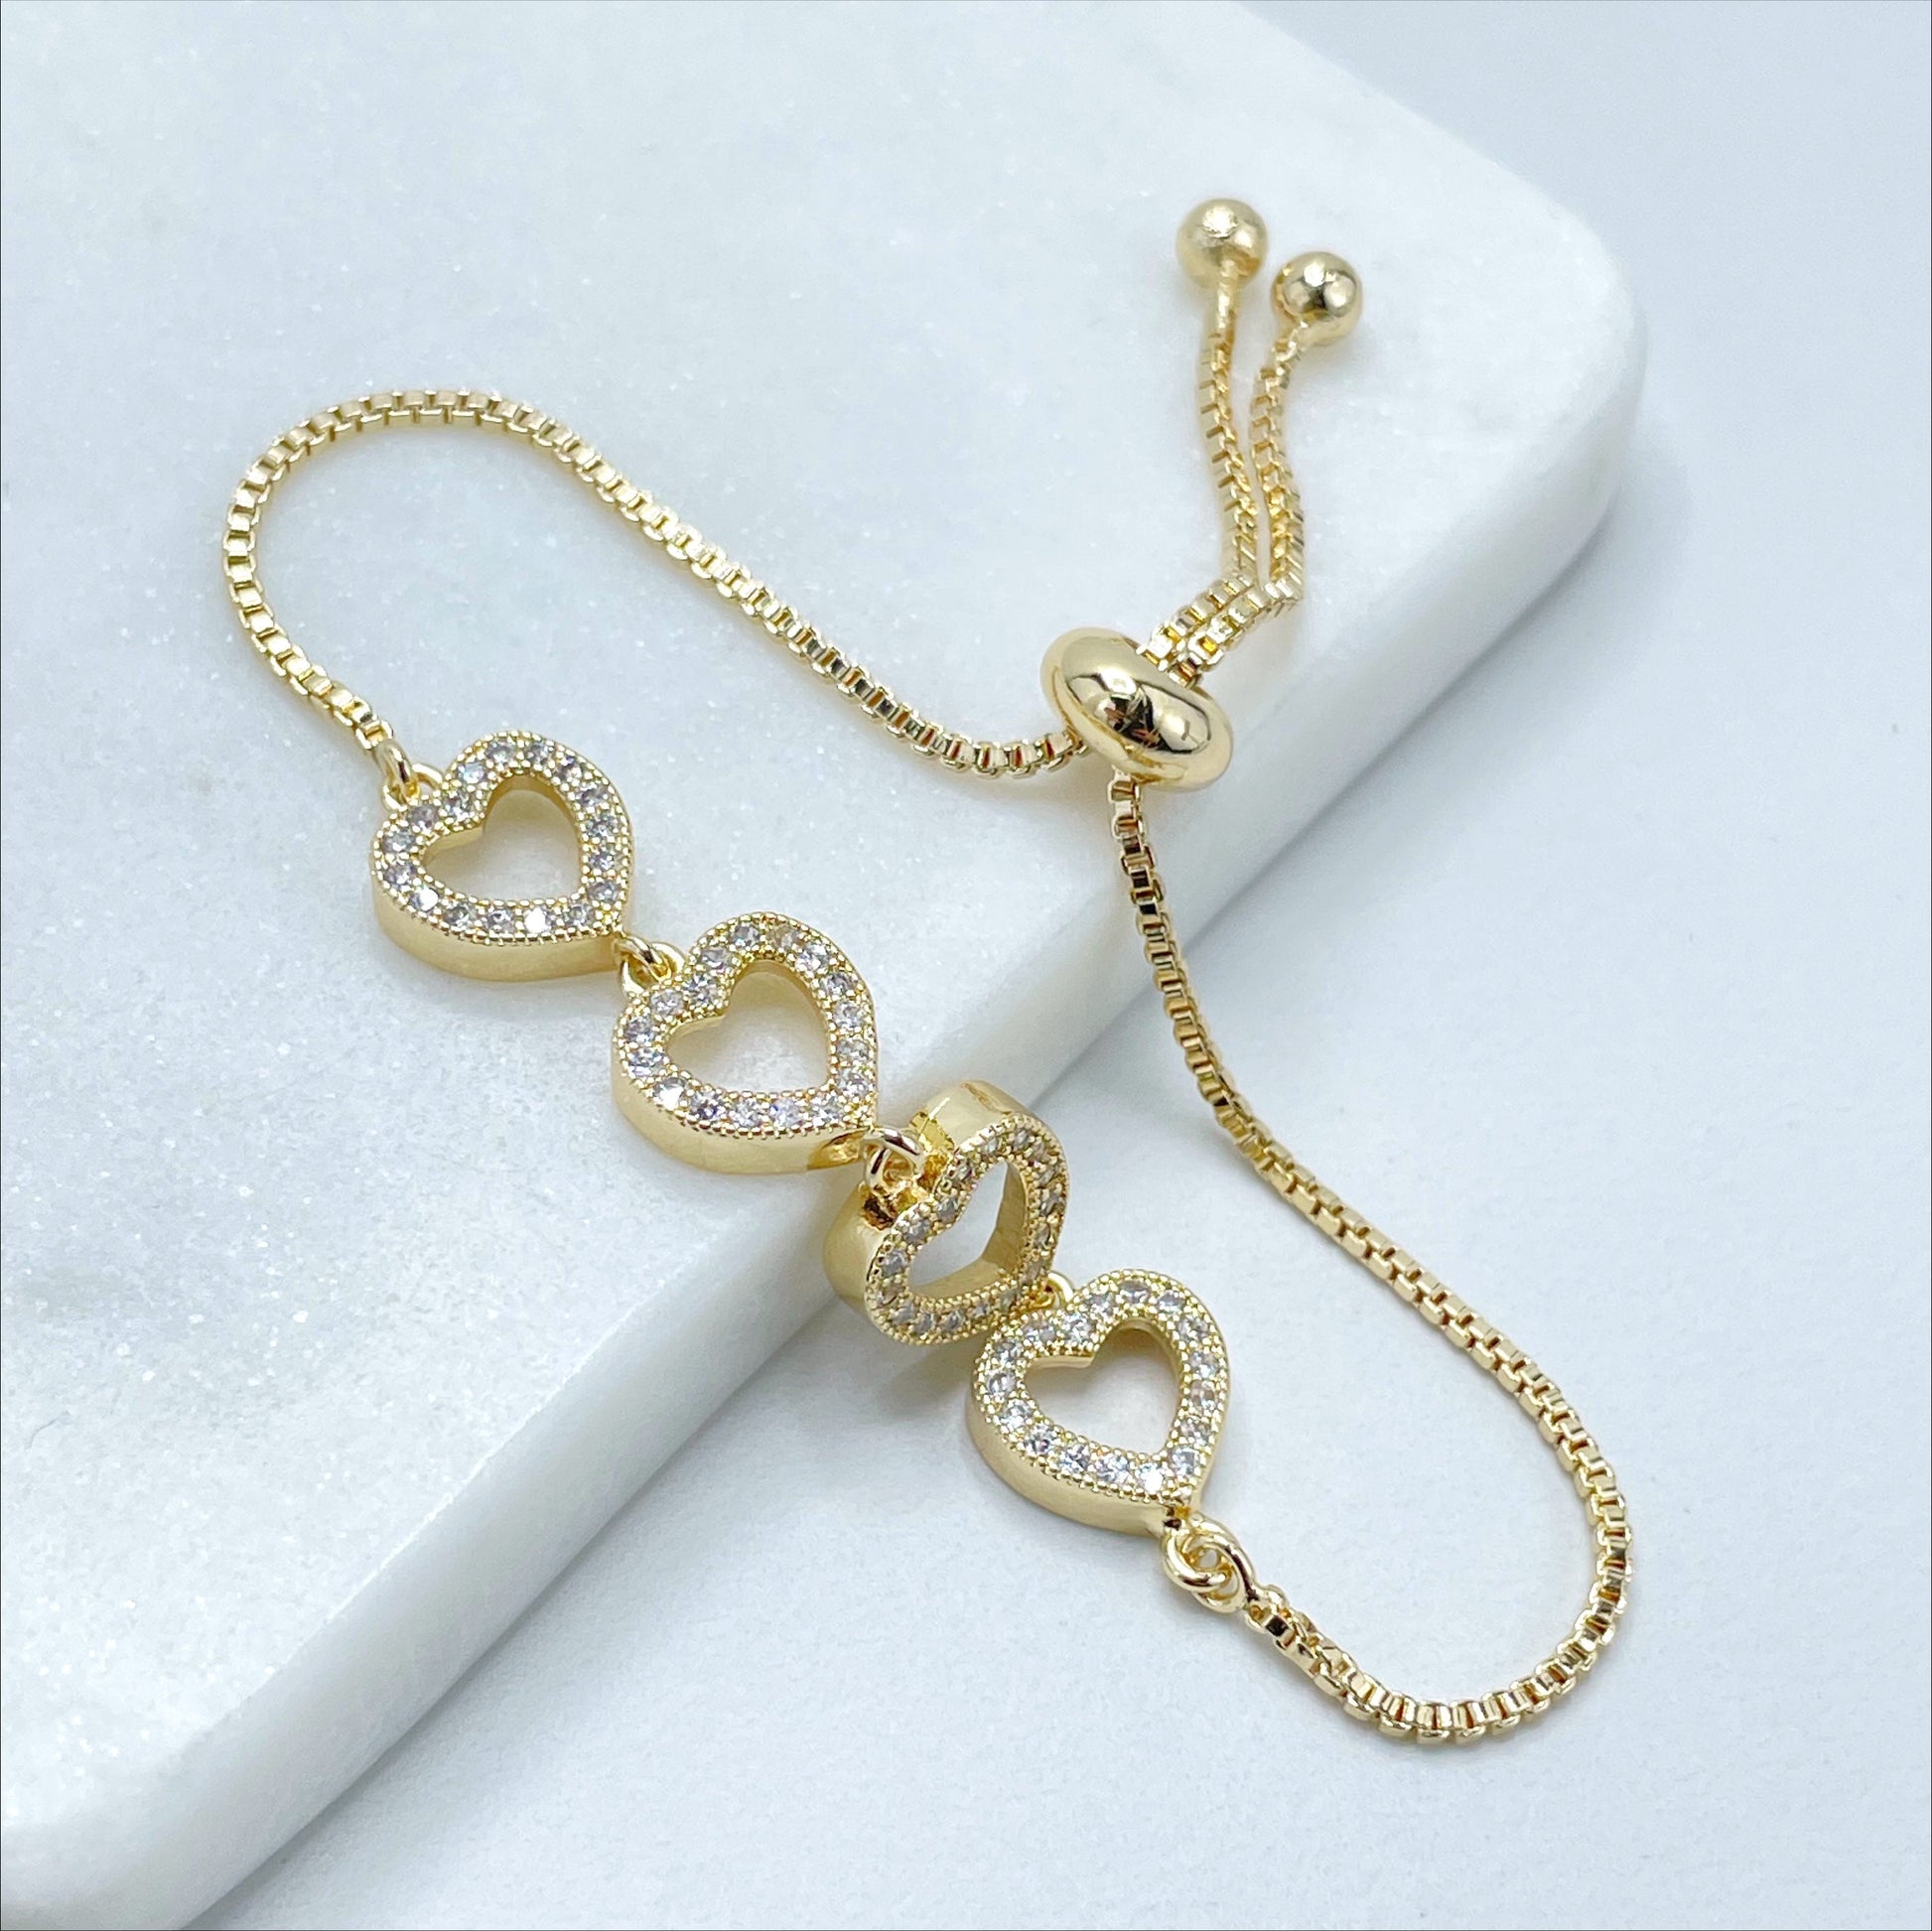 18k Gold Filled with Cubic Zirconia Fours Hearts Adjustable Bracelet Wholesale Jewelry Supplies